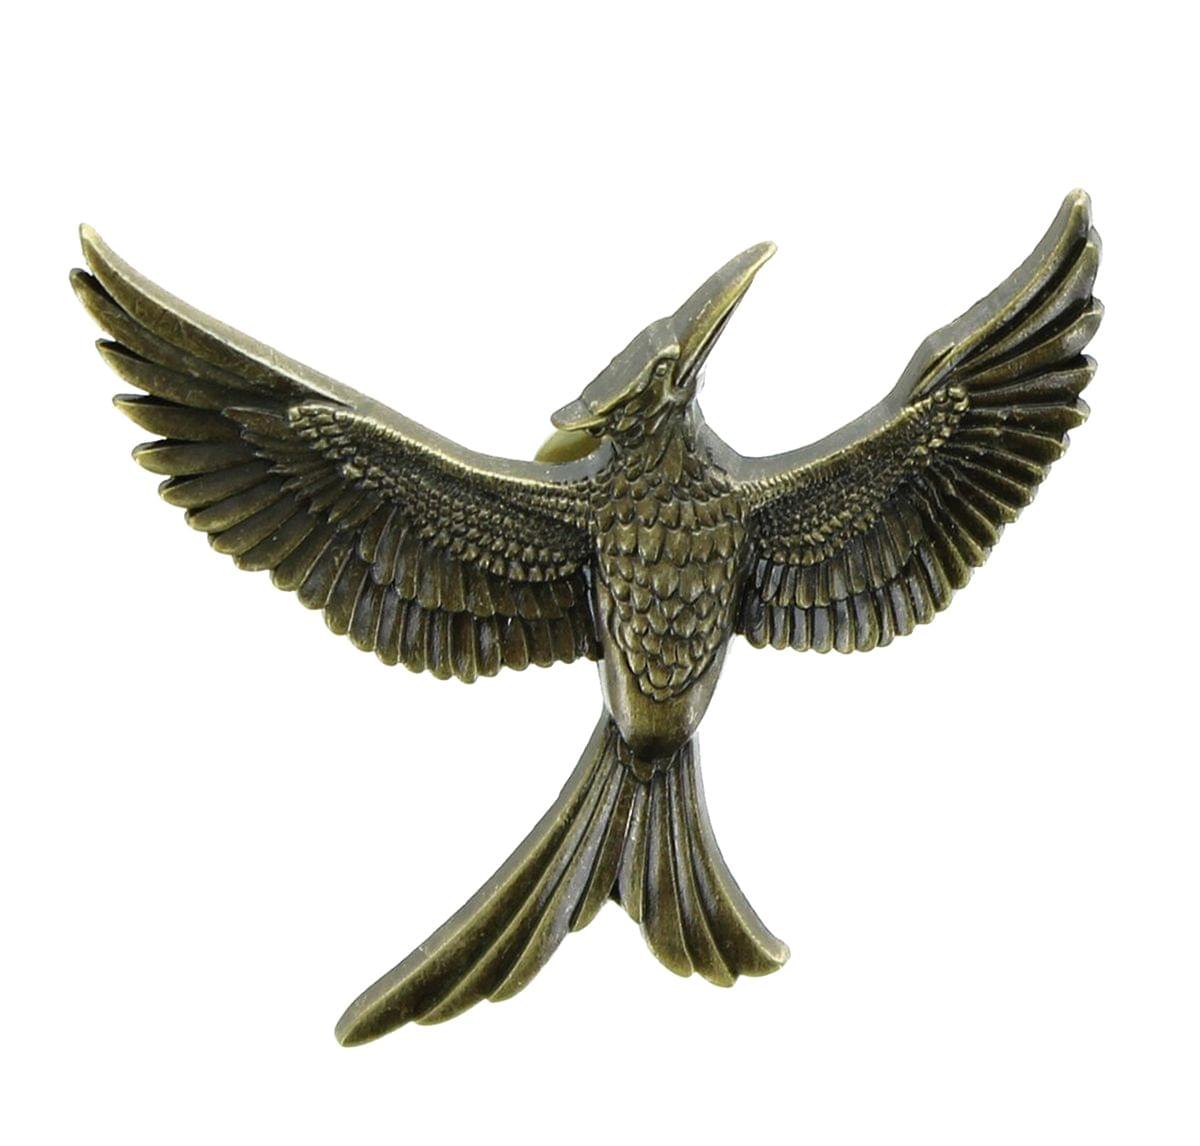 The Hunger Games Movie Mockingjay Prop Rep Pin